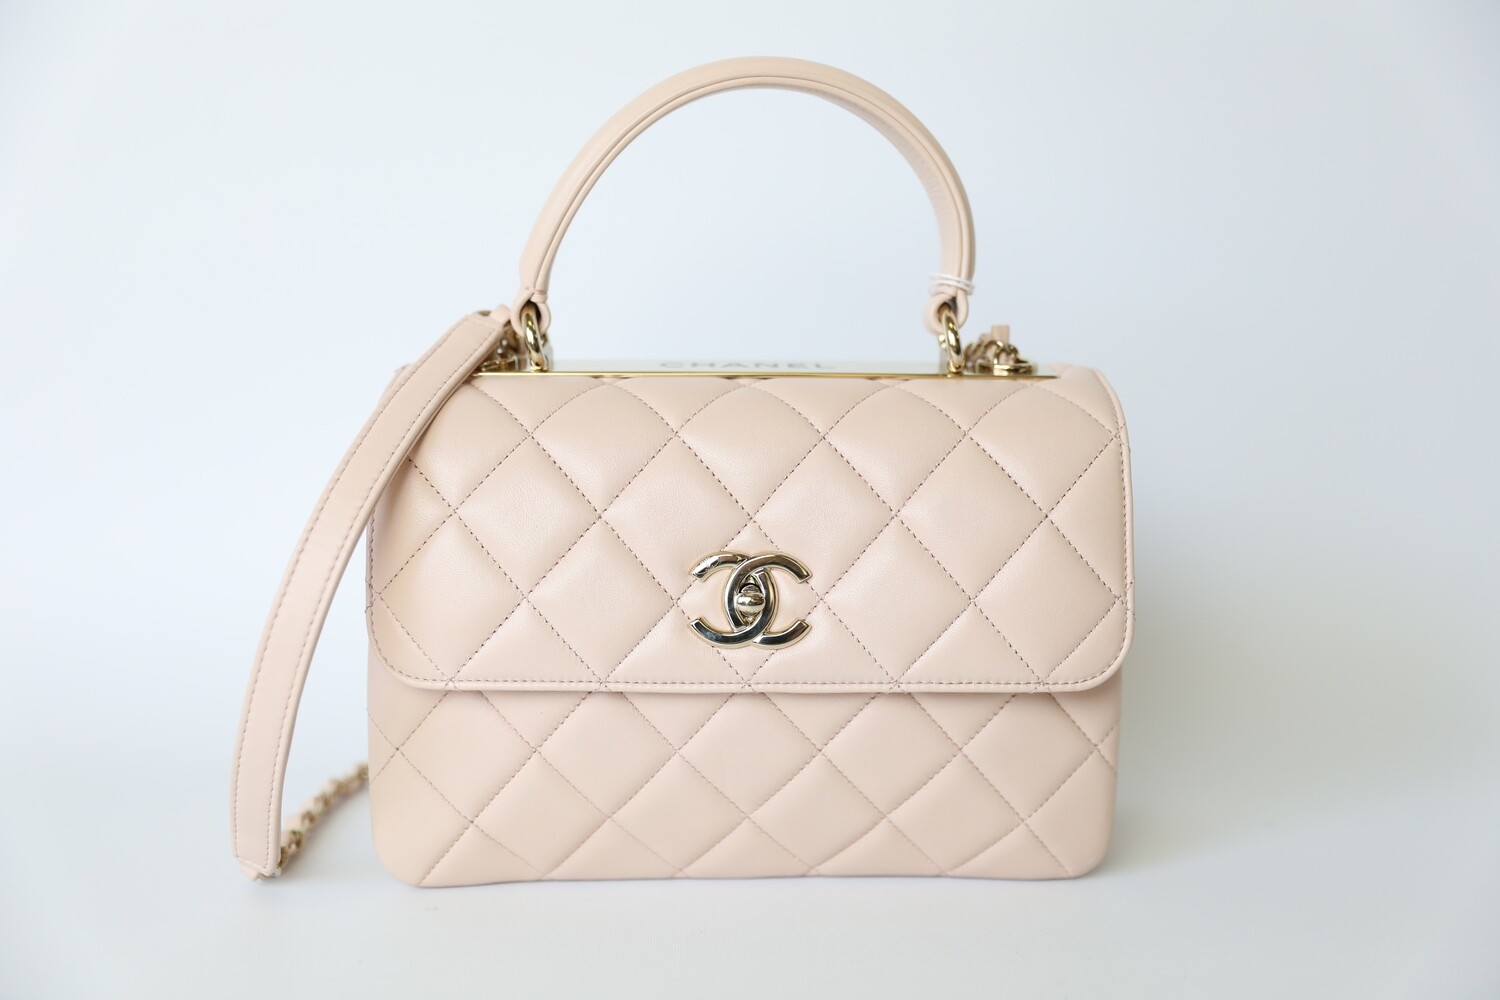 Chanel Trendy Small, Pink Beige Lambskin with Gold Hardware, Preowned in Box  WA001 - Julia Rose Boston